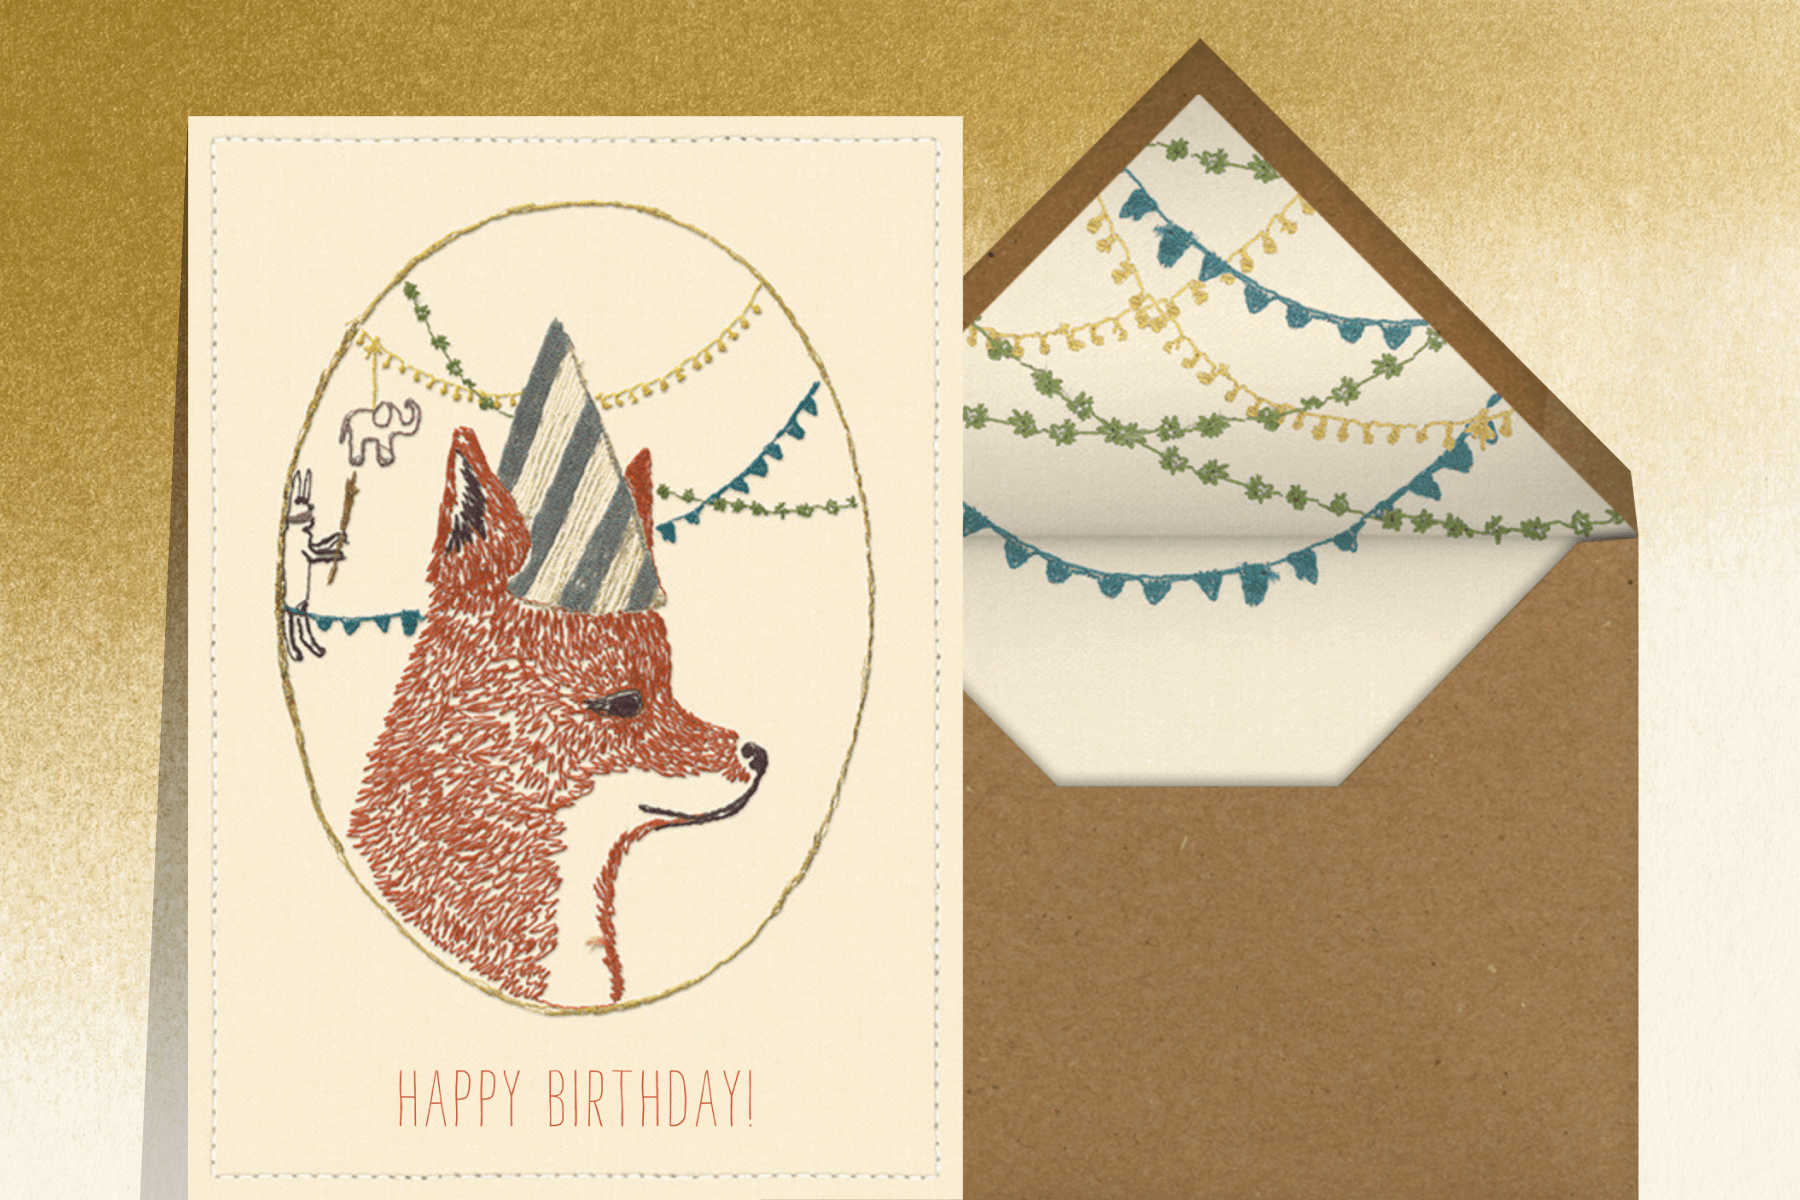 A birthday greeting card featuring a fox in a party hat.